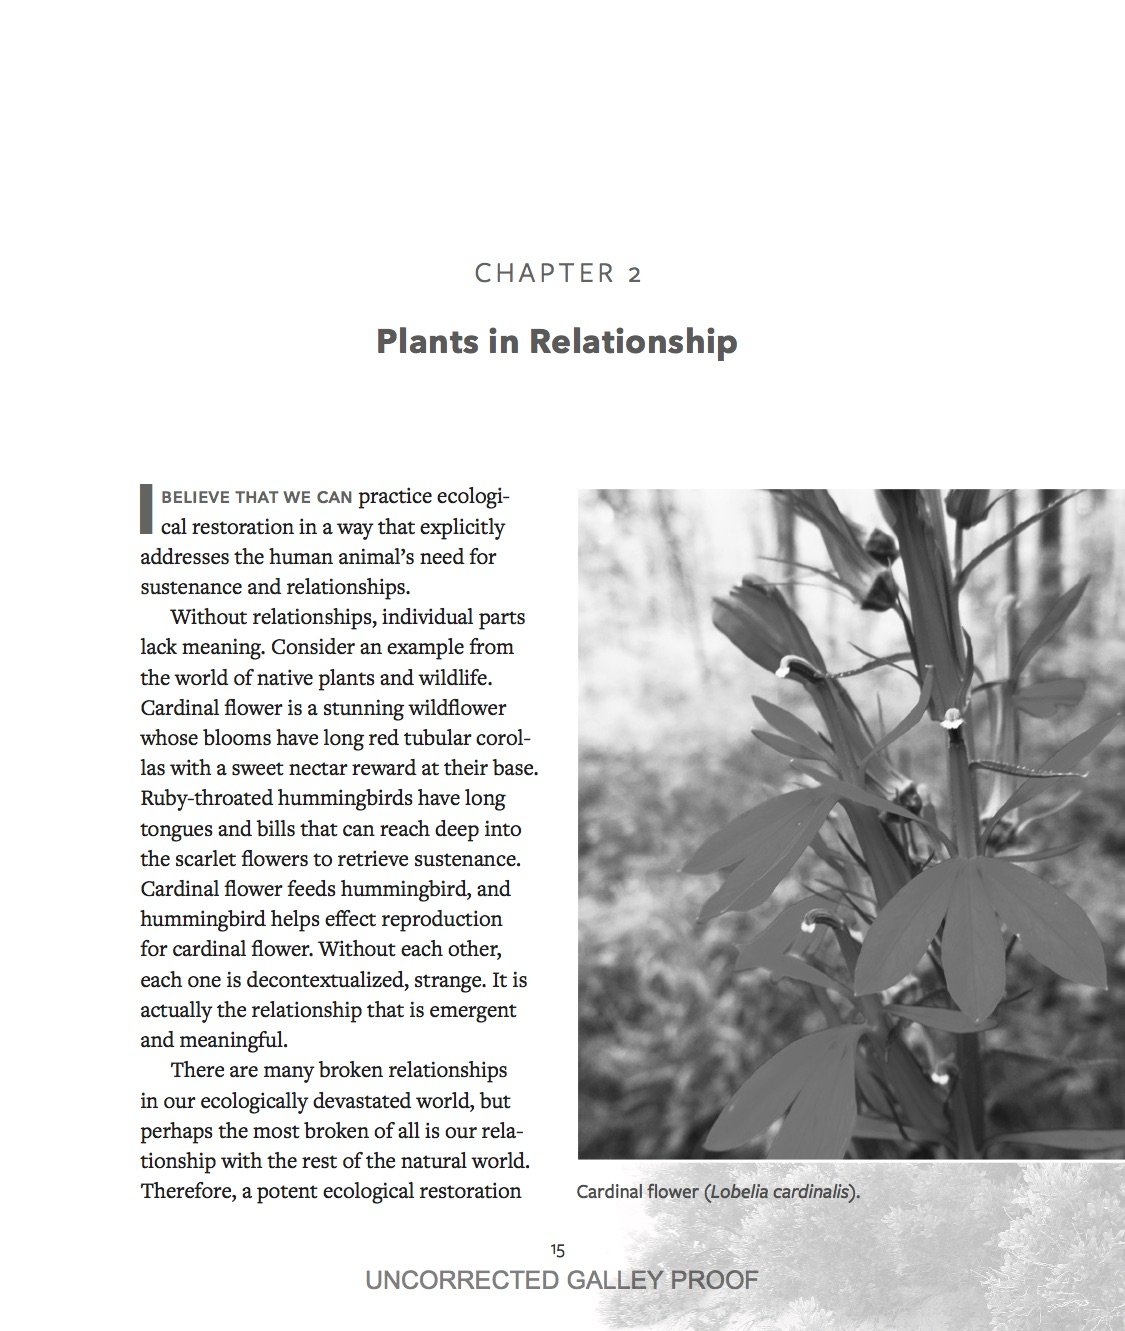 Wild Plant Culture galley proof May 25Cov (dragged) 4.jpeg